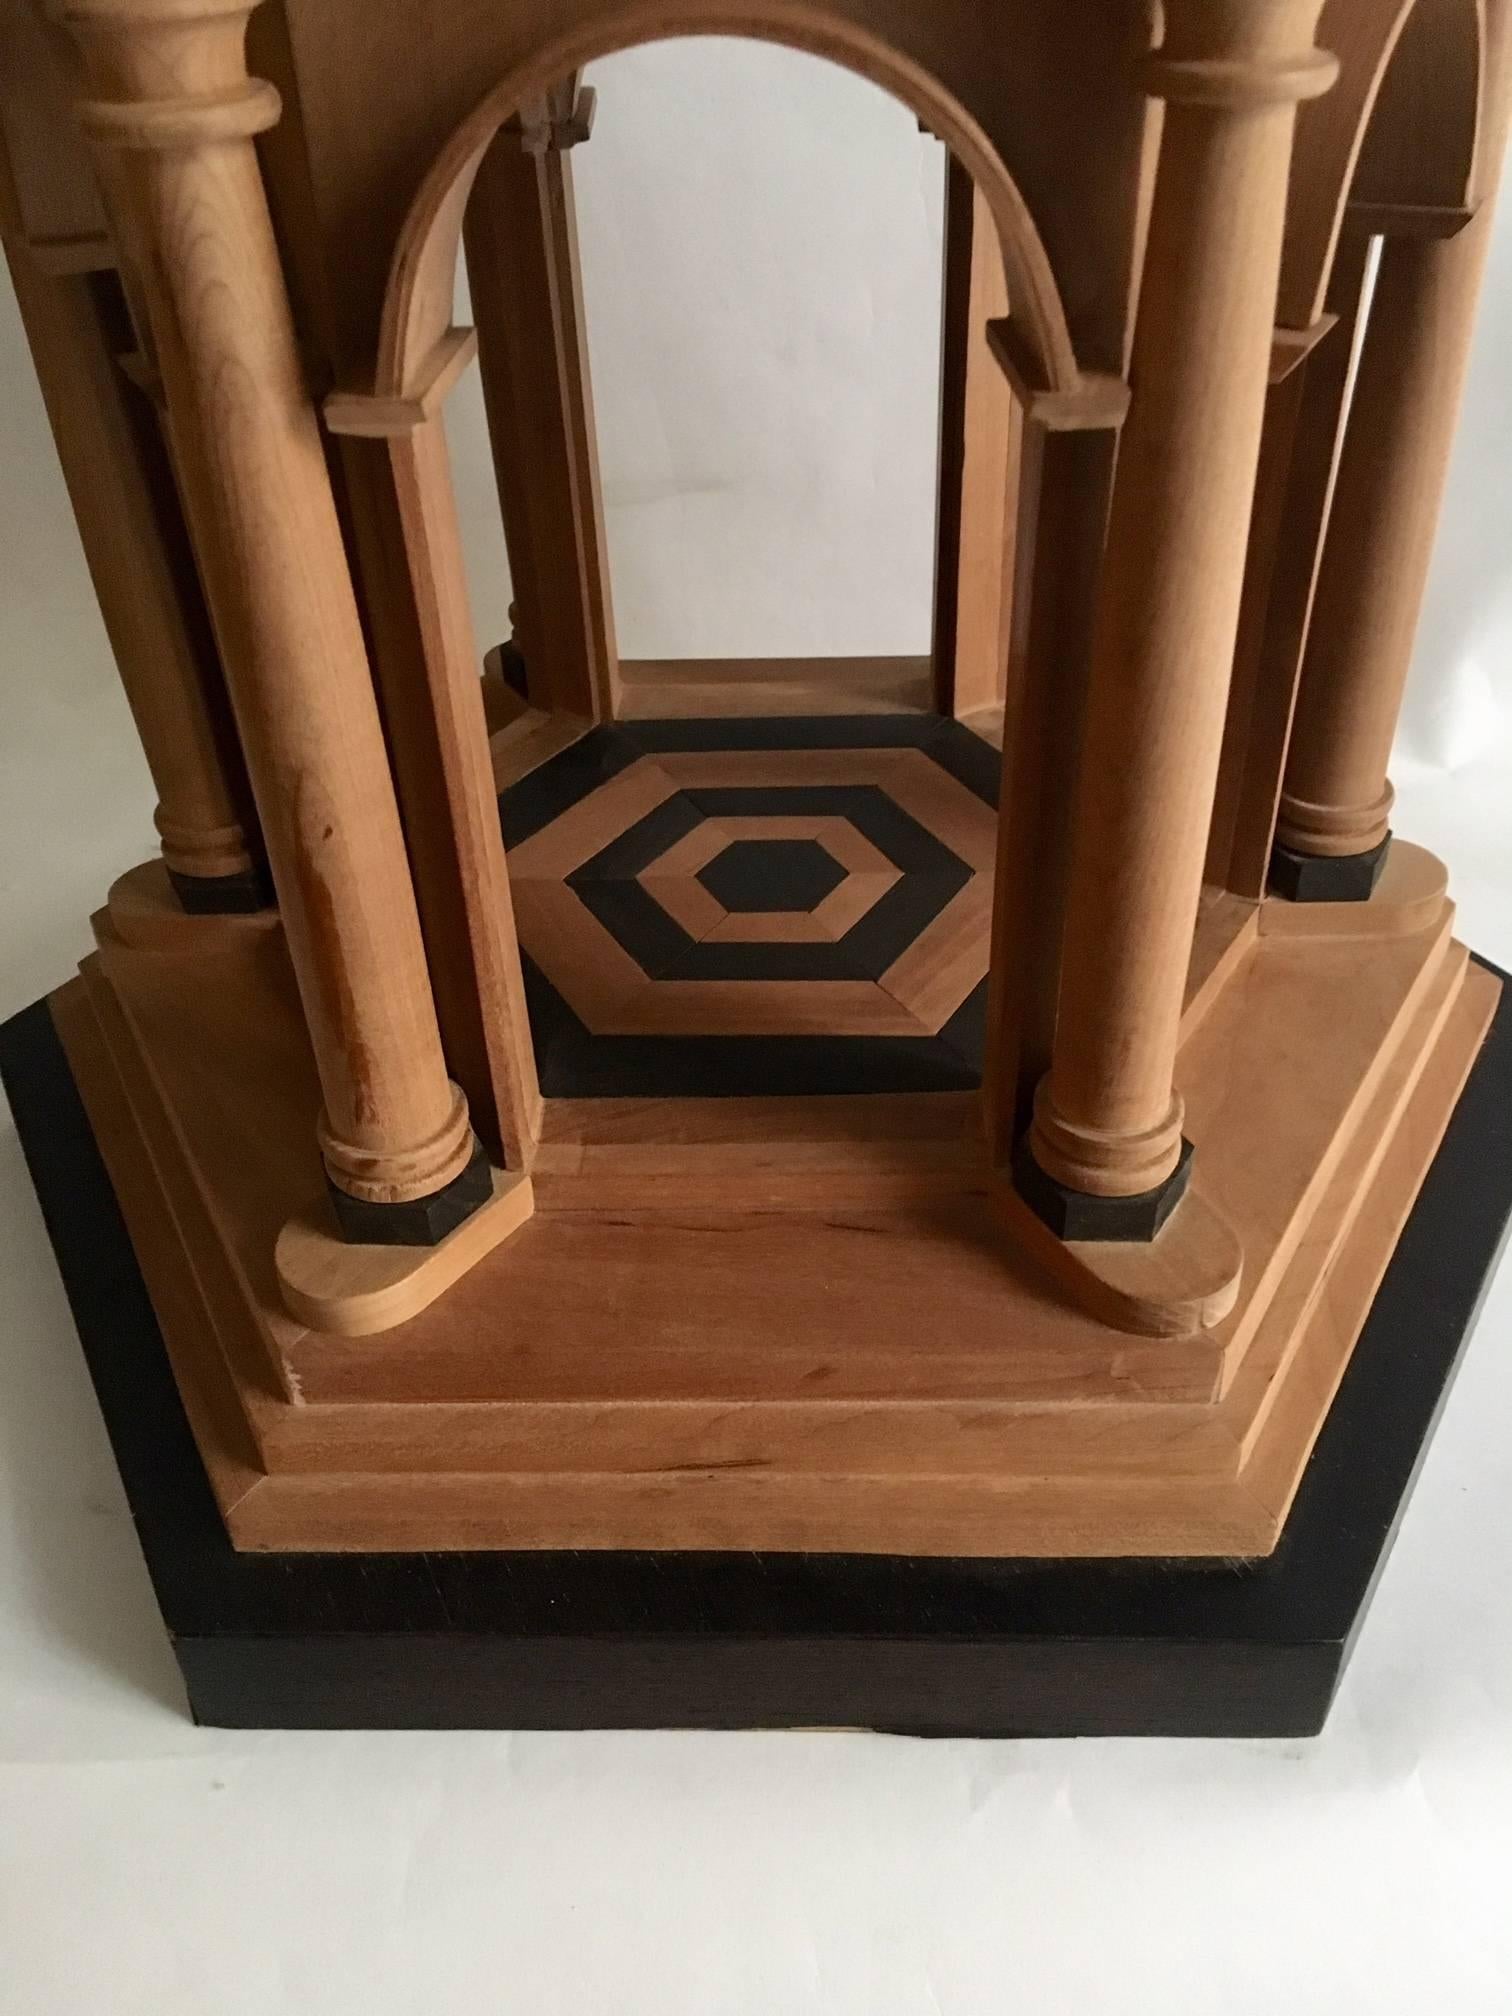 Model of architecture, in different woods, based on the models of the Italian Renaissance Architectural, fascinating early dome building.
Bare Rose wood and ebony, combined with very fine marquetry, sinuous curves and arches in beautifully finished